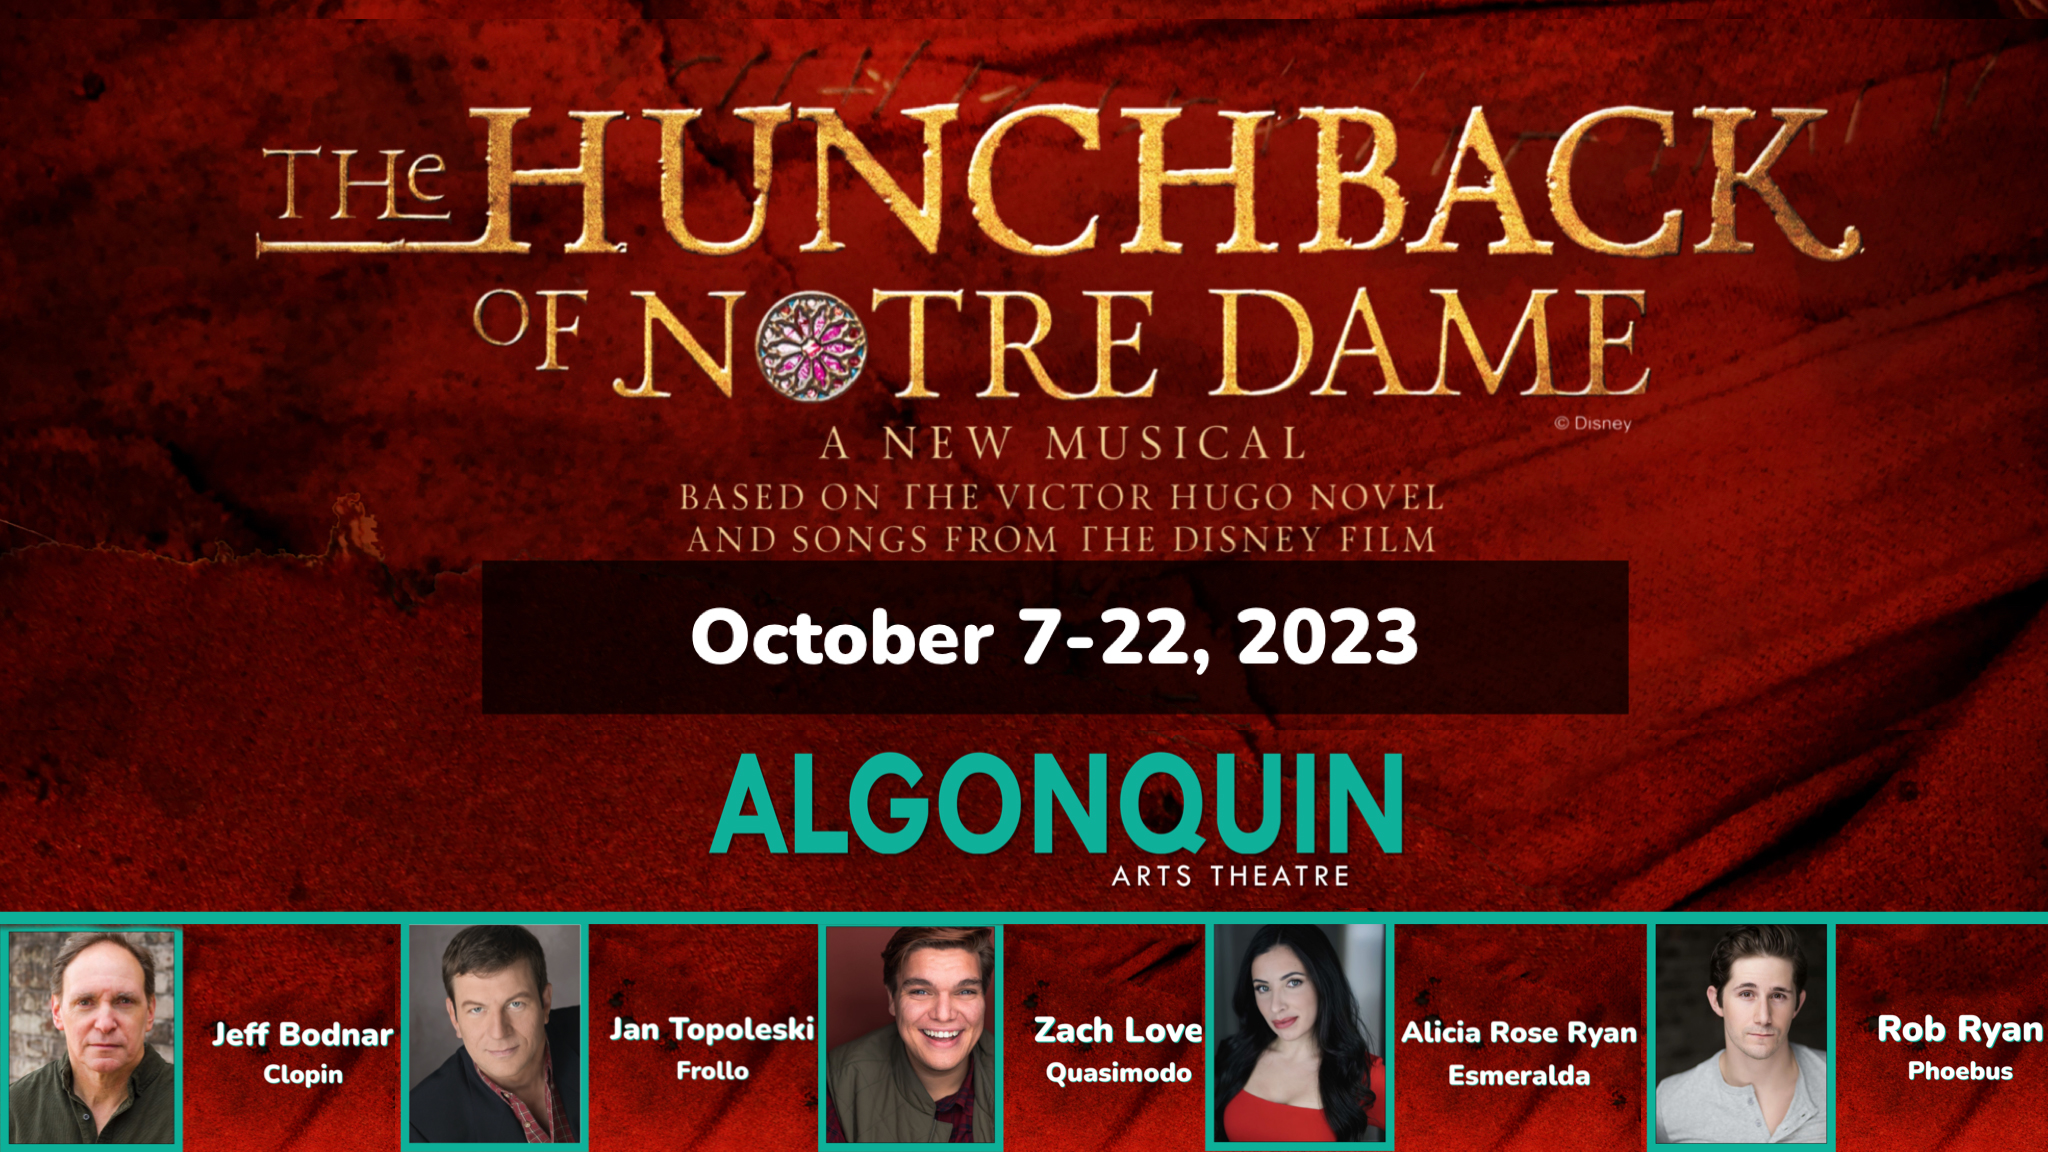 Algonquin Arts Theatre Announces Casting
and Creative Team for The Hunchback of Notre Dame